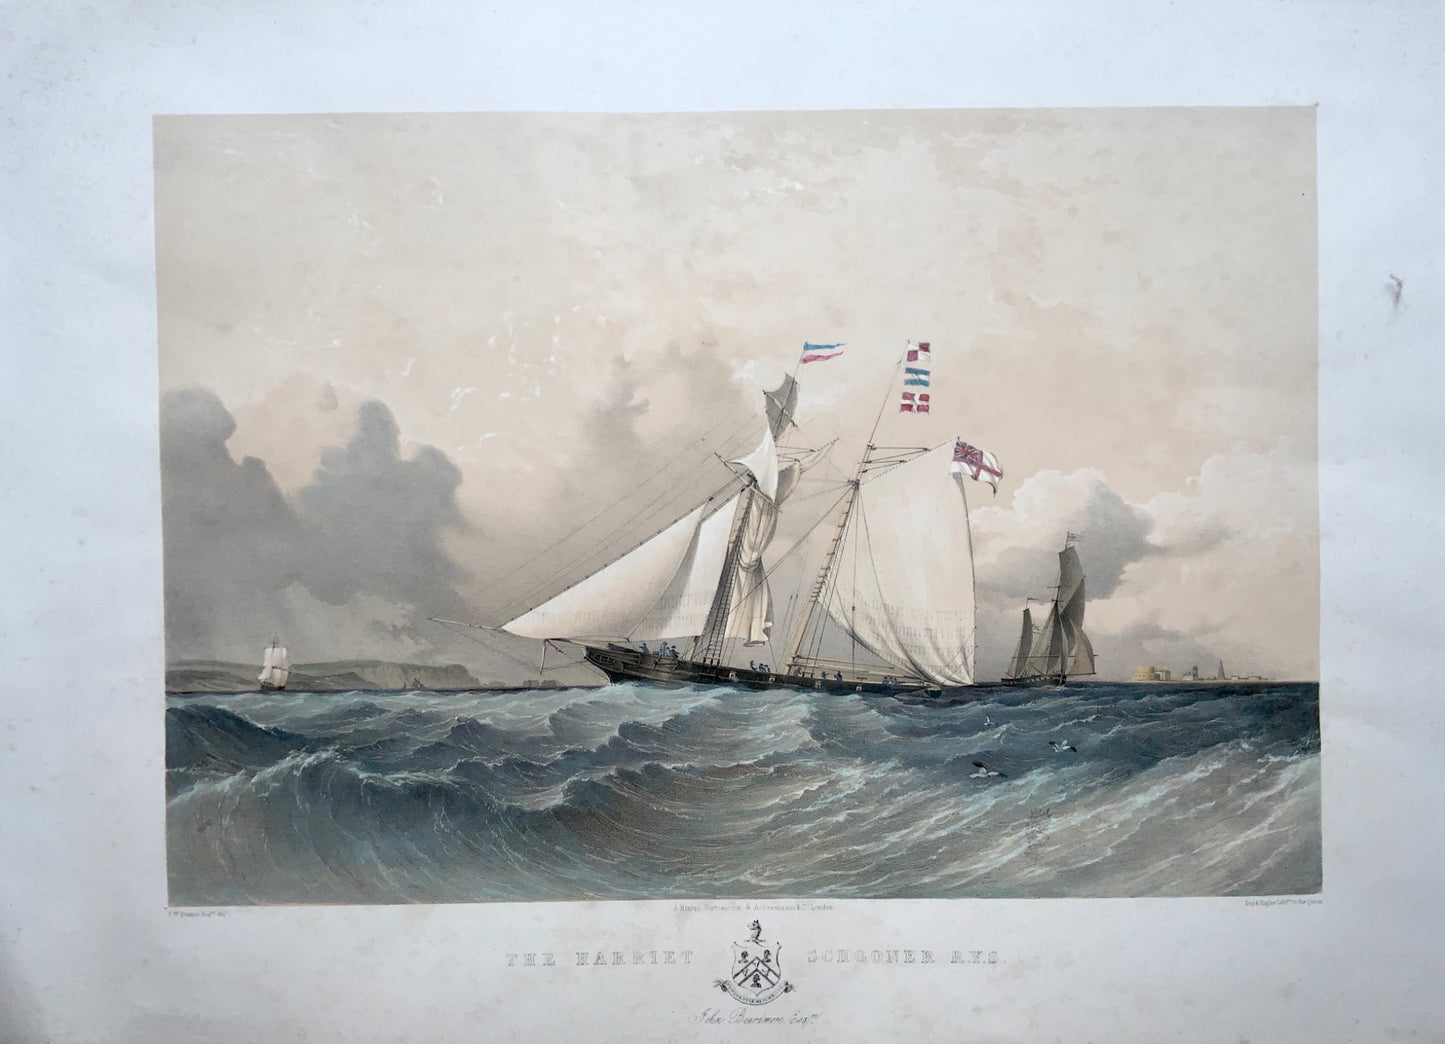 1850c Staines, F W; Day & Haghe Large stone Lithograph HARRIET SCHOONER Sailing - Maritime